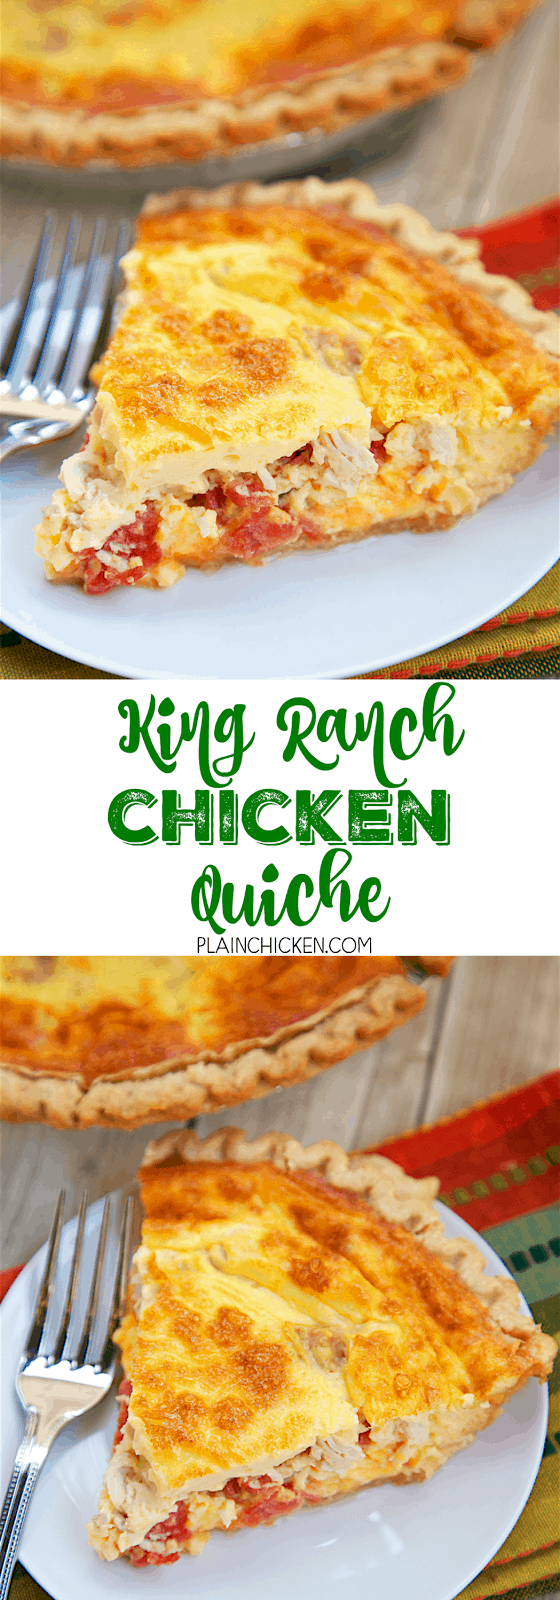 King Ranch Chicken Quiche - all the flavors of King Ranch Casserole in a quiche! Chicken, Rotel tomatoes, Velveeta, eggs and heavy cream baked in a pie crust. SOOOO good! We ate this for lunch and dinner the same day. You can make this ahead of time and freeze unbaked for later. This is always a hit in our house! Great Mexican quiche!